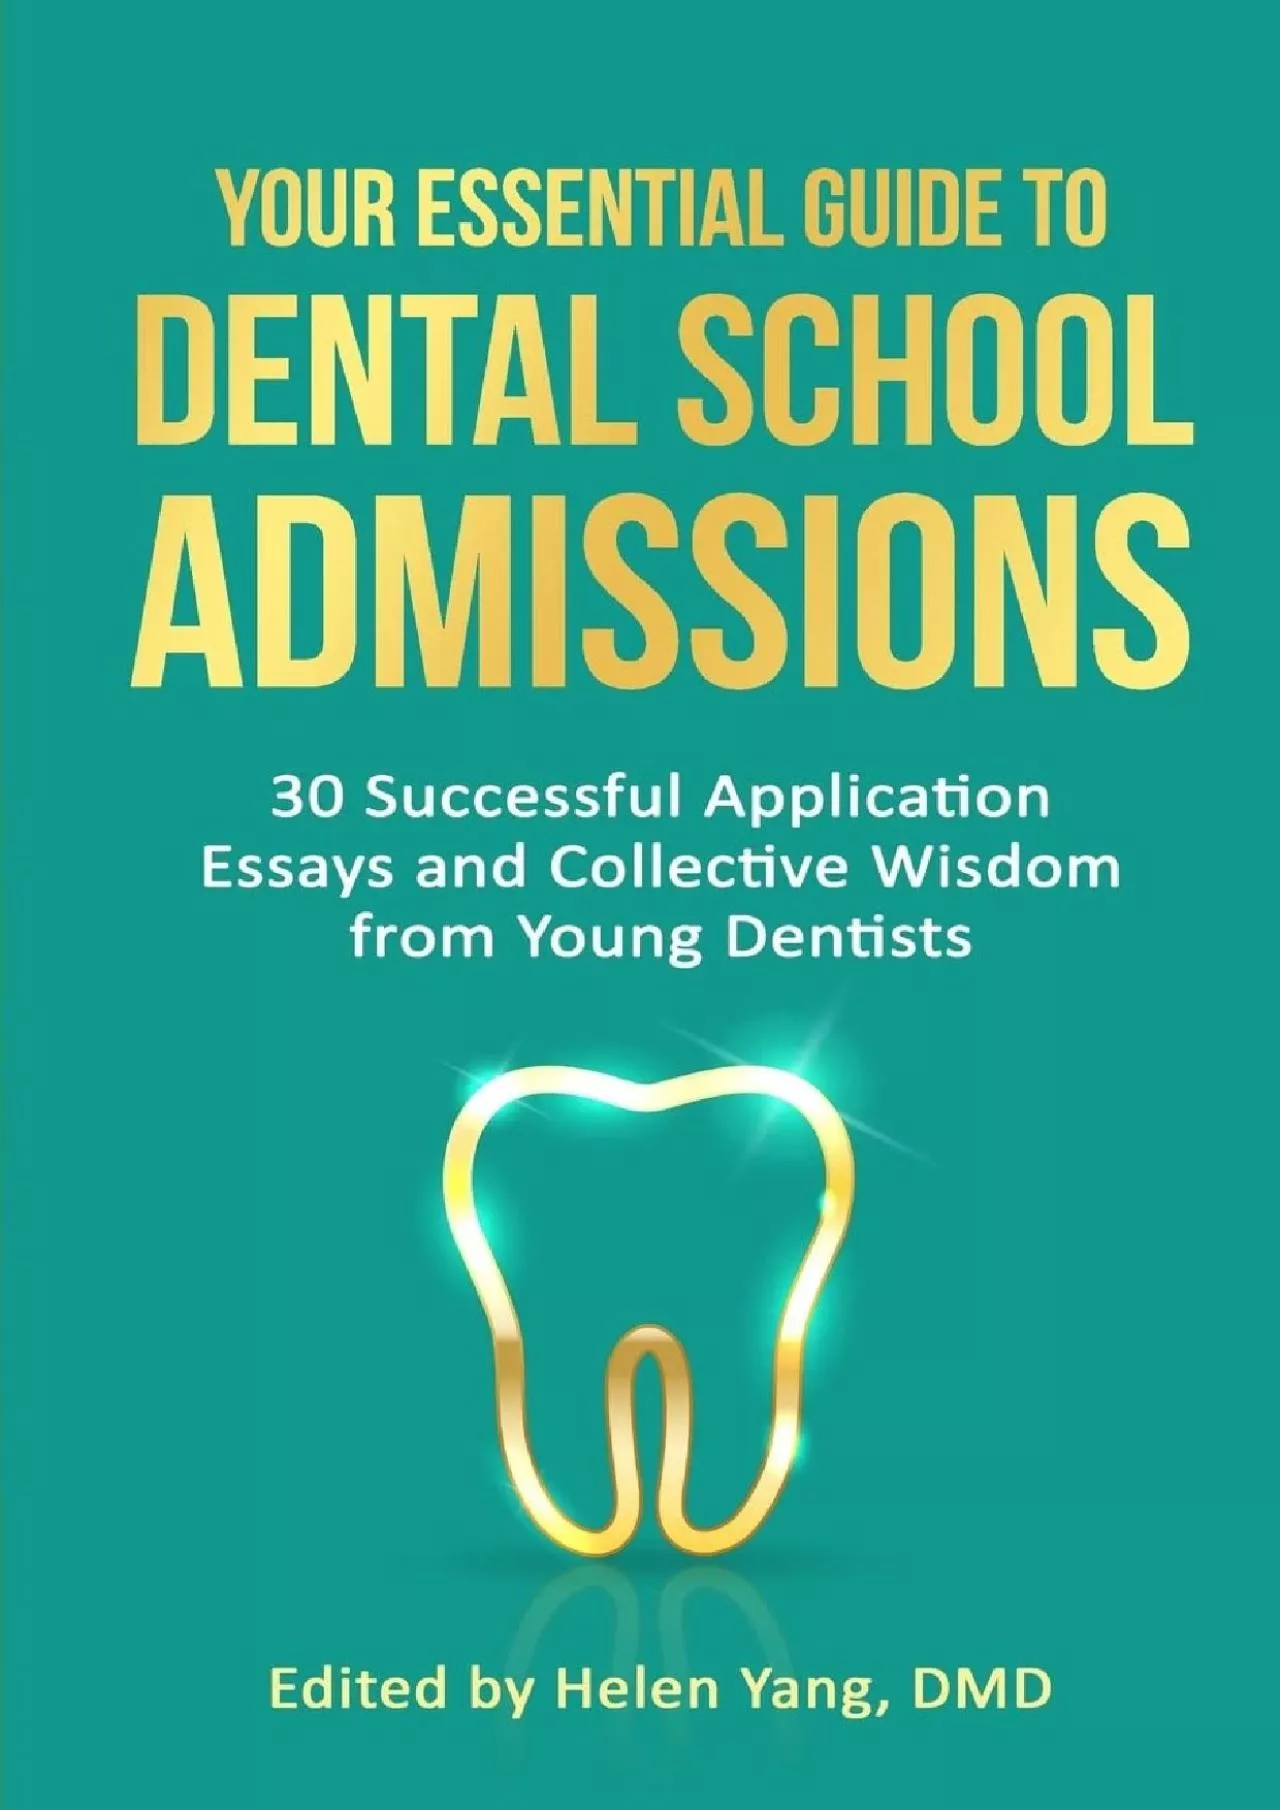 [EBOOK] Your Essential Guide to Dental School Admissions: 30 Successful Application Essays